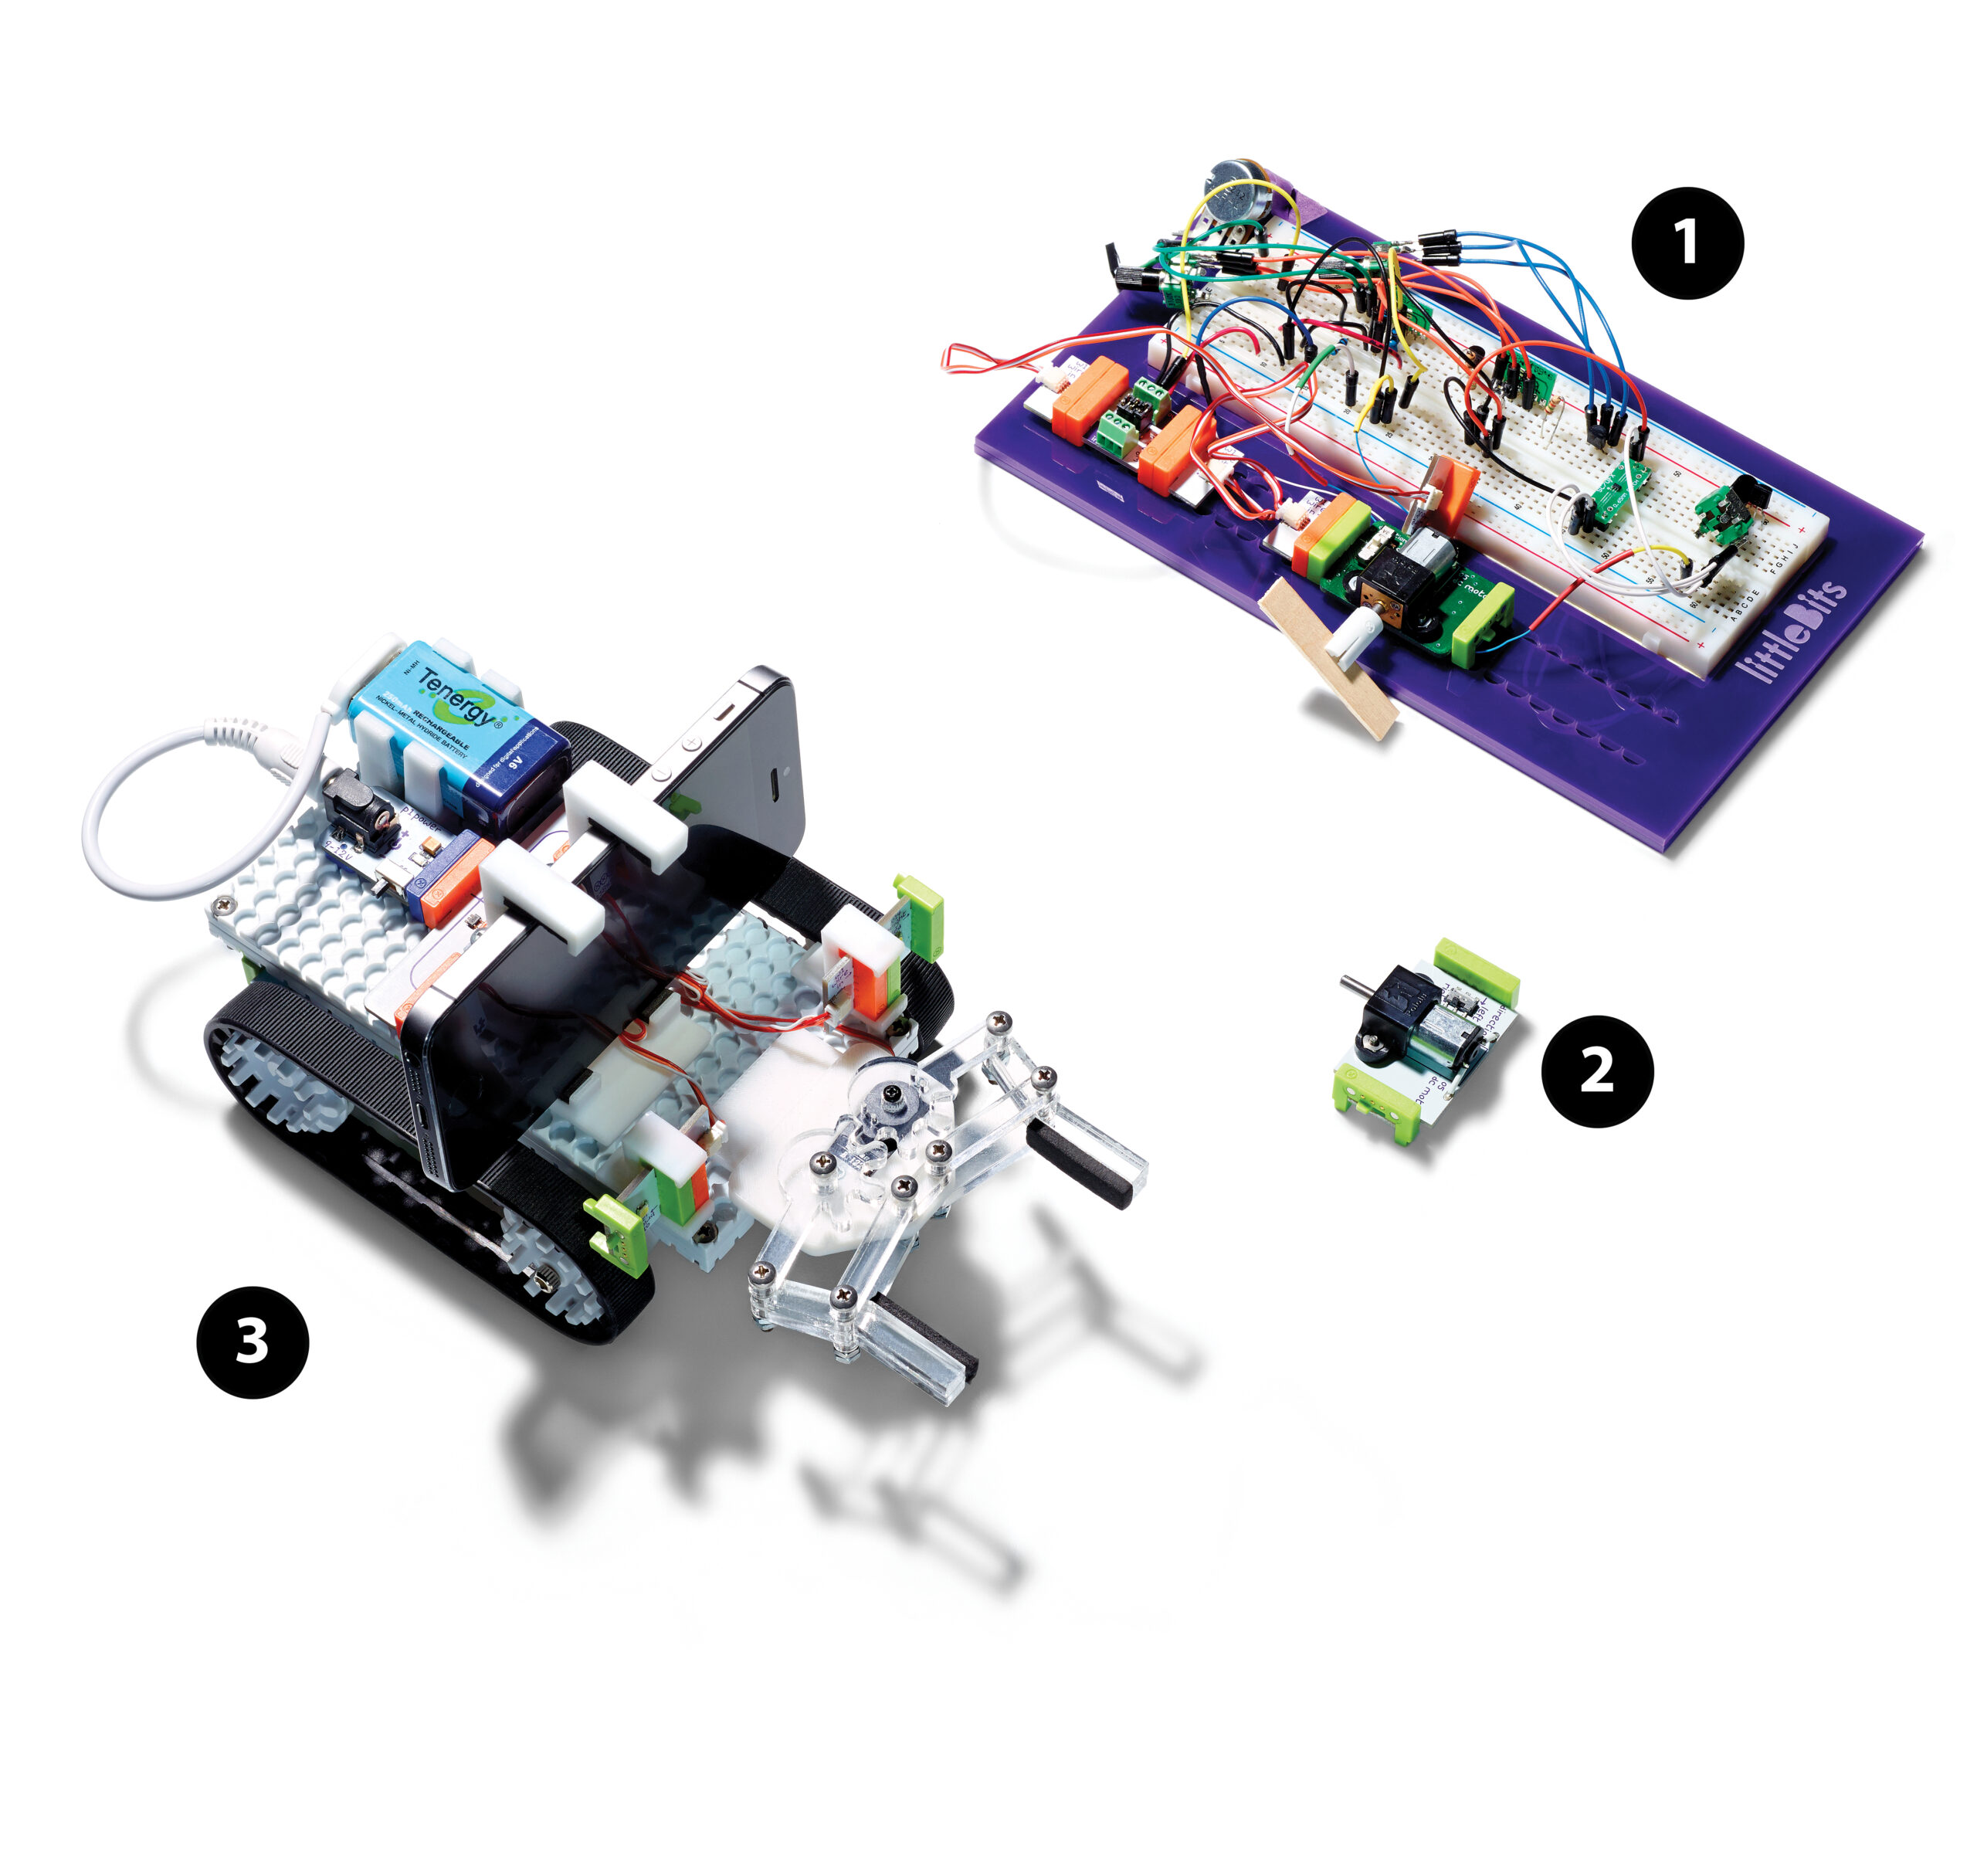 How littleBits Engineers Turn Their Ideas Into DIY Kits